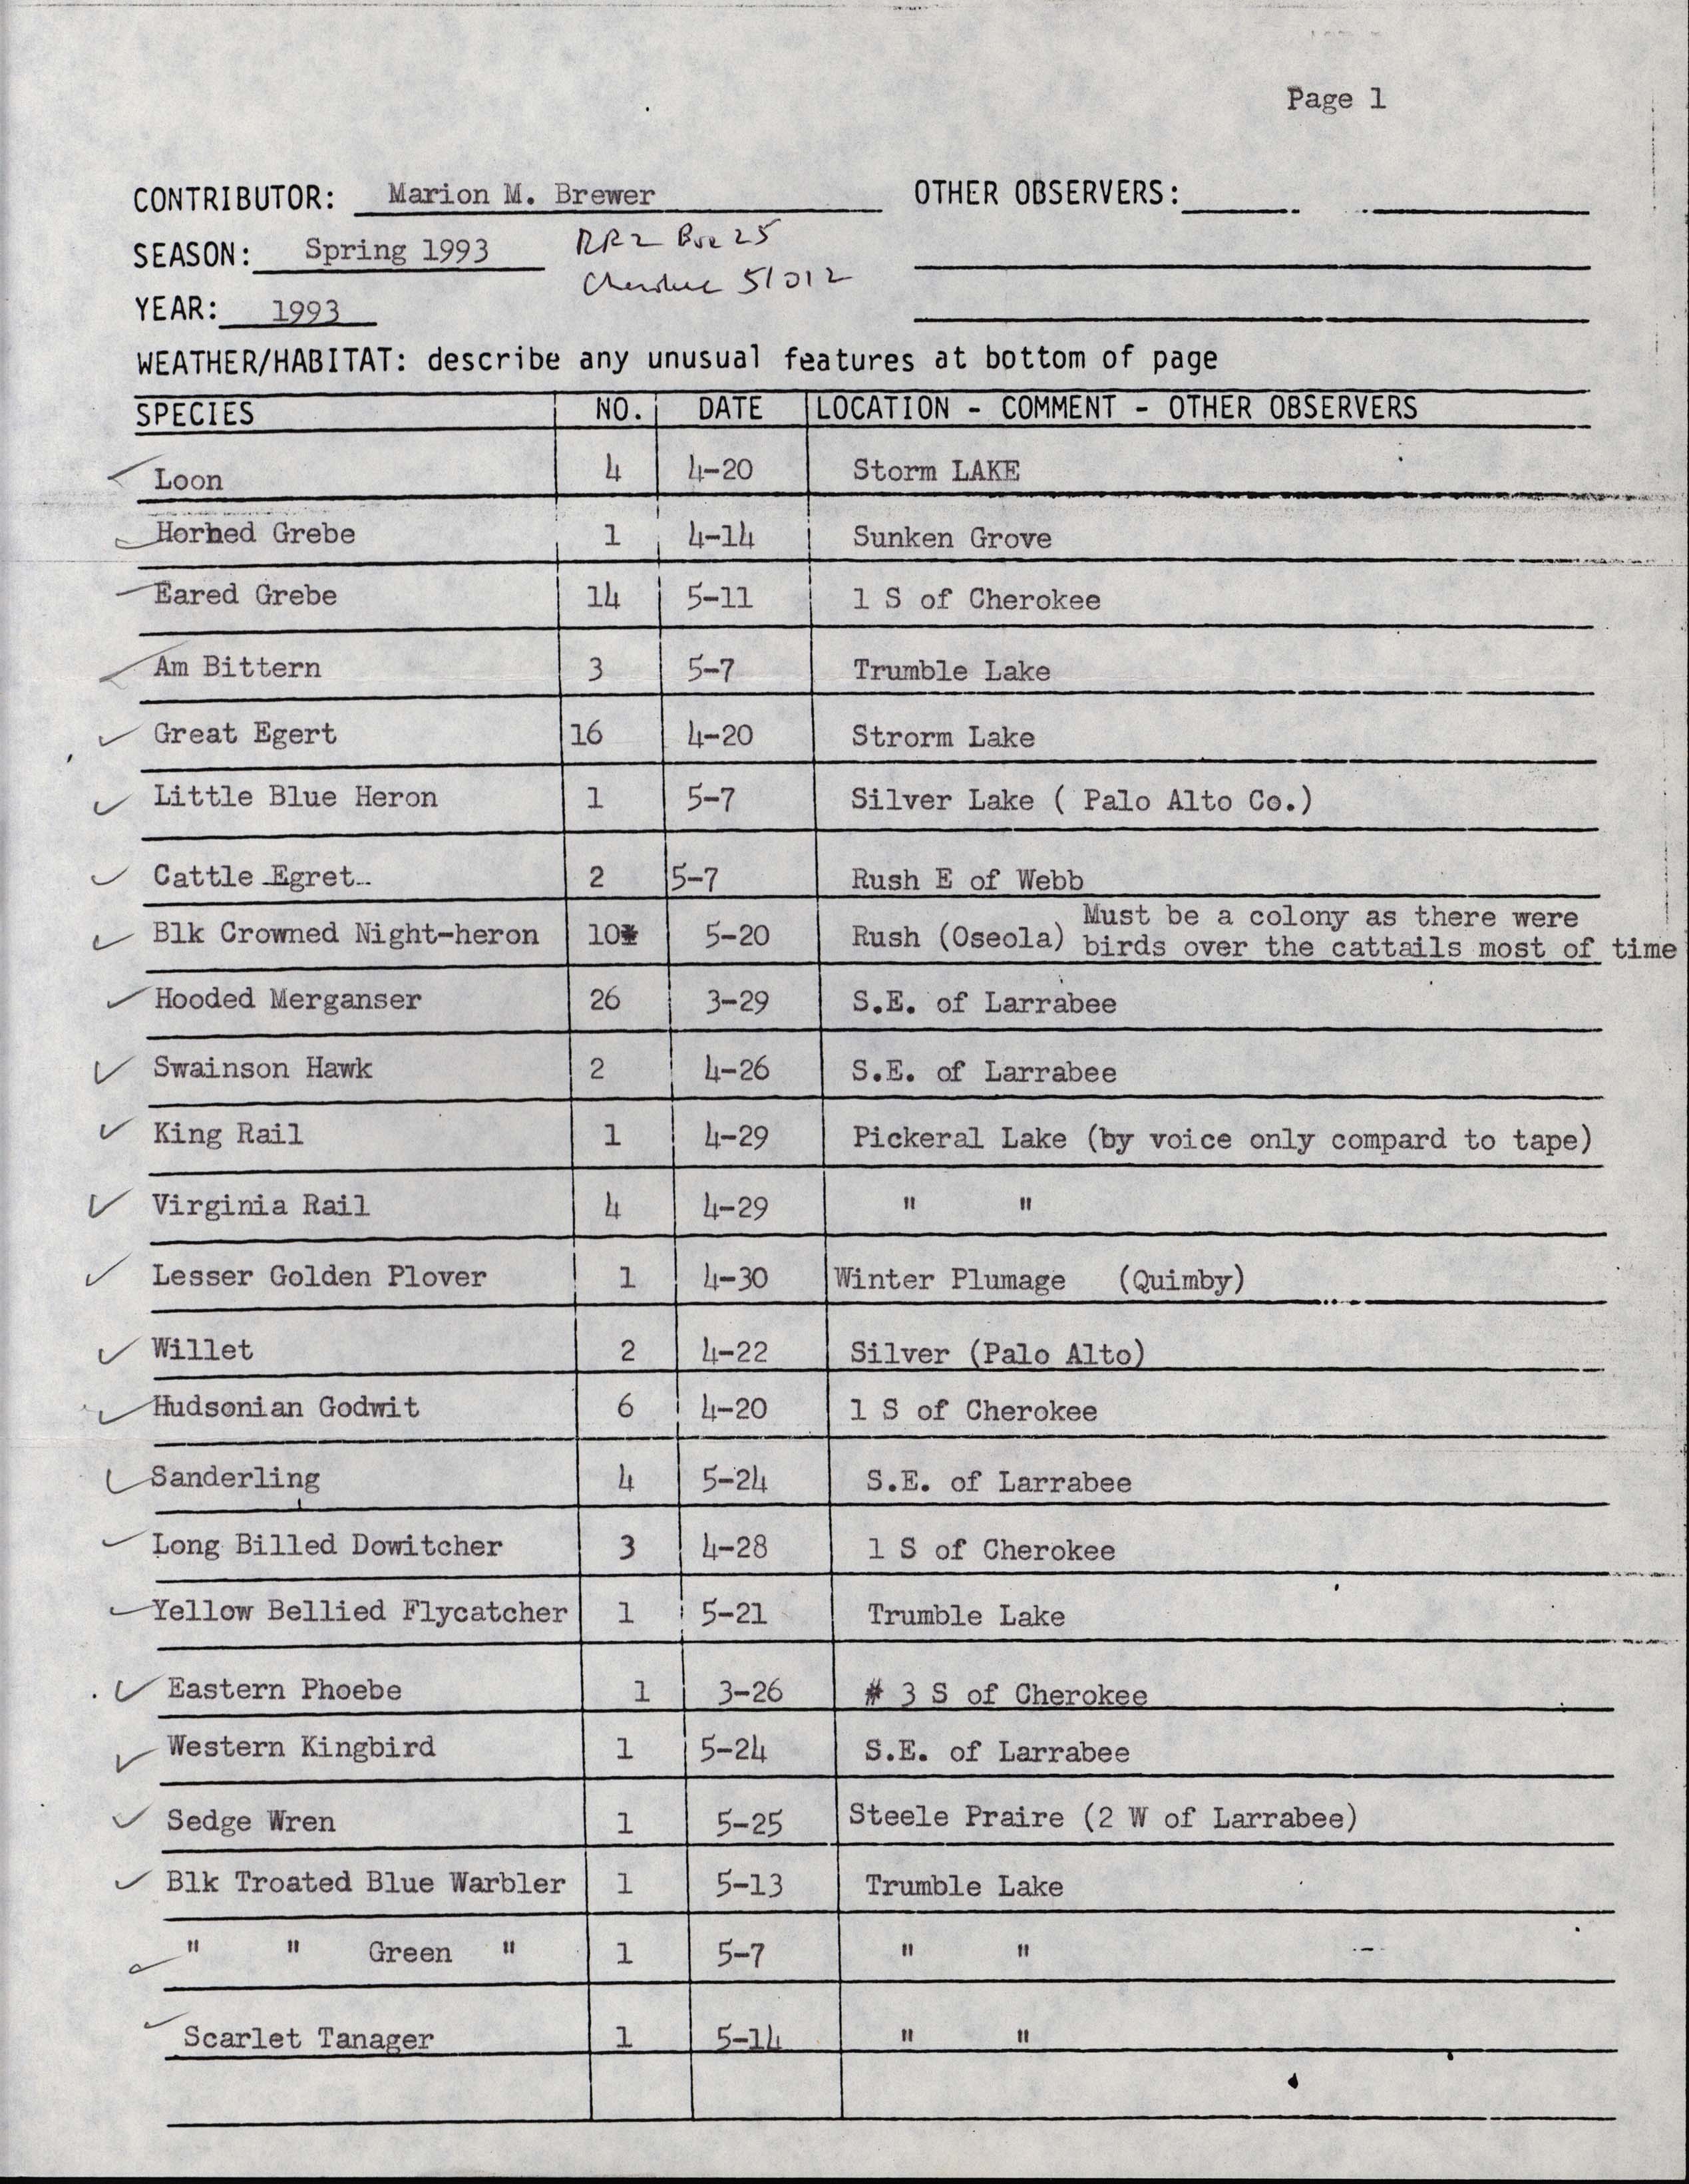 Annotated bird sighting list for Spring 1993 compiled by Marion Brewer